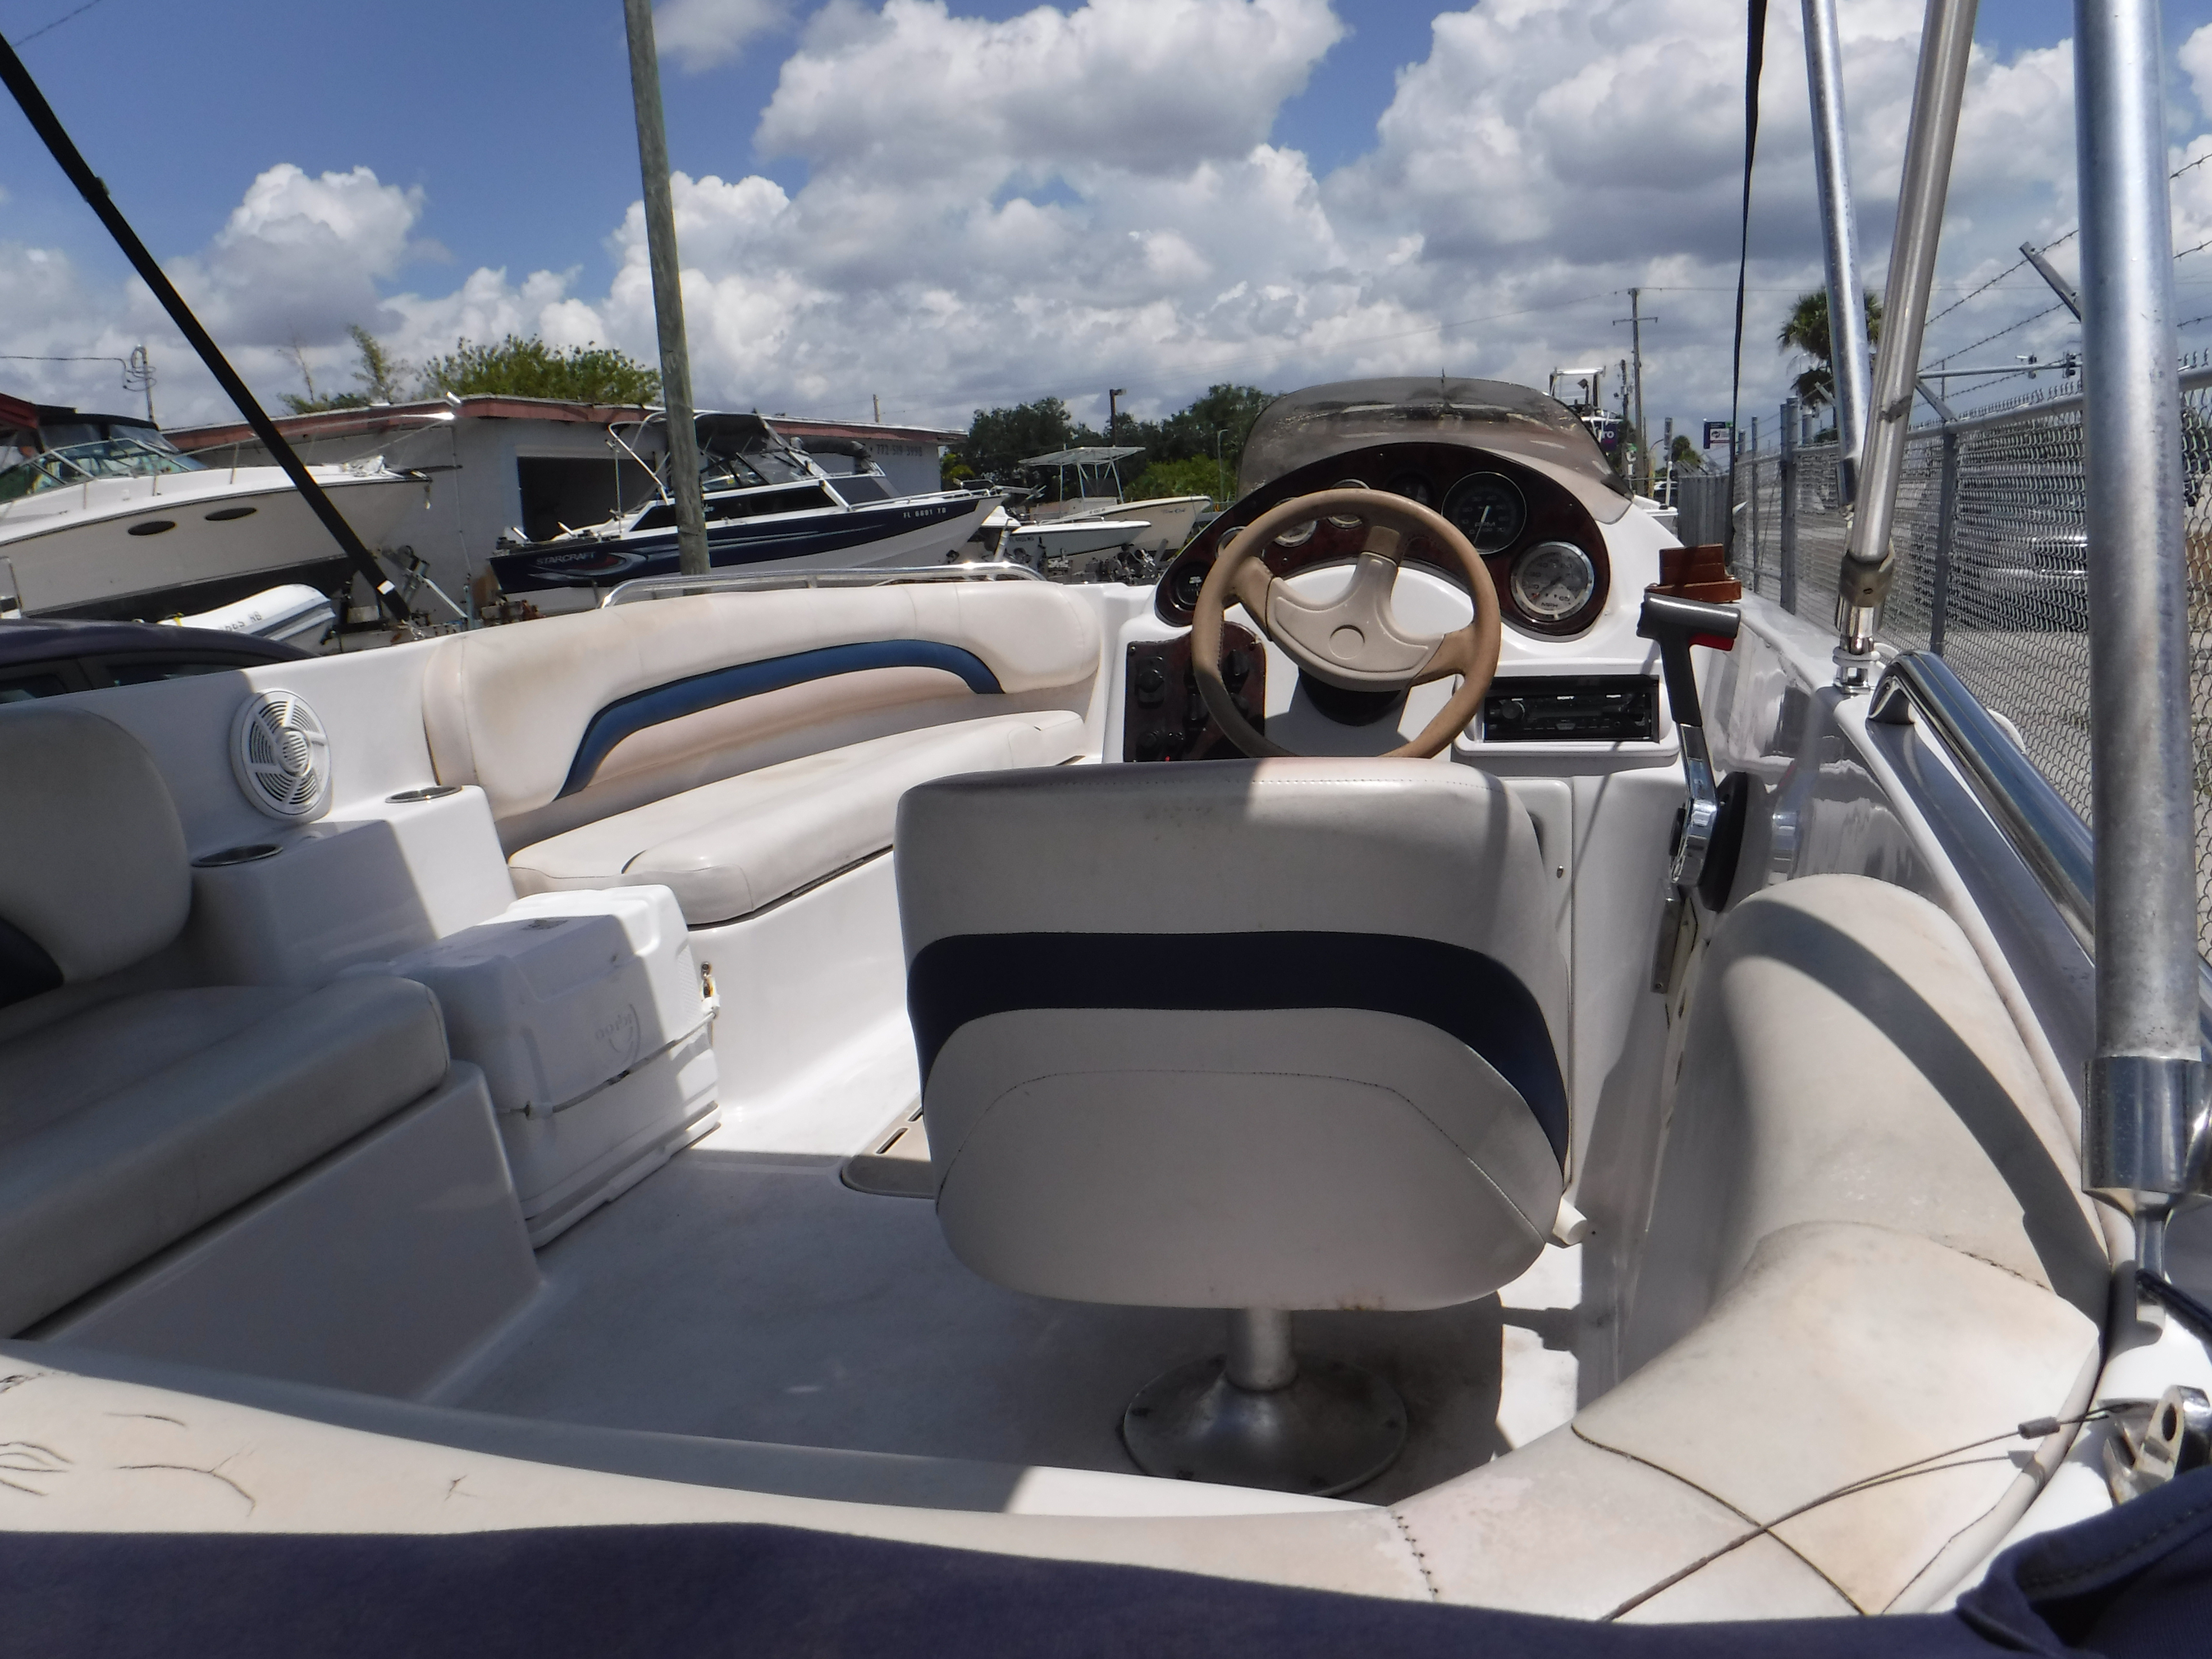 2000 Godfrey Hurricane FD GS 170 Power boat for sale in Hutchinson Is, FL - image 6 